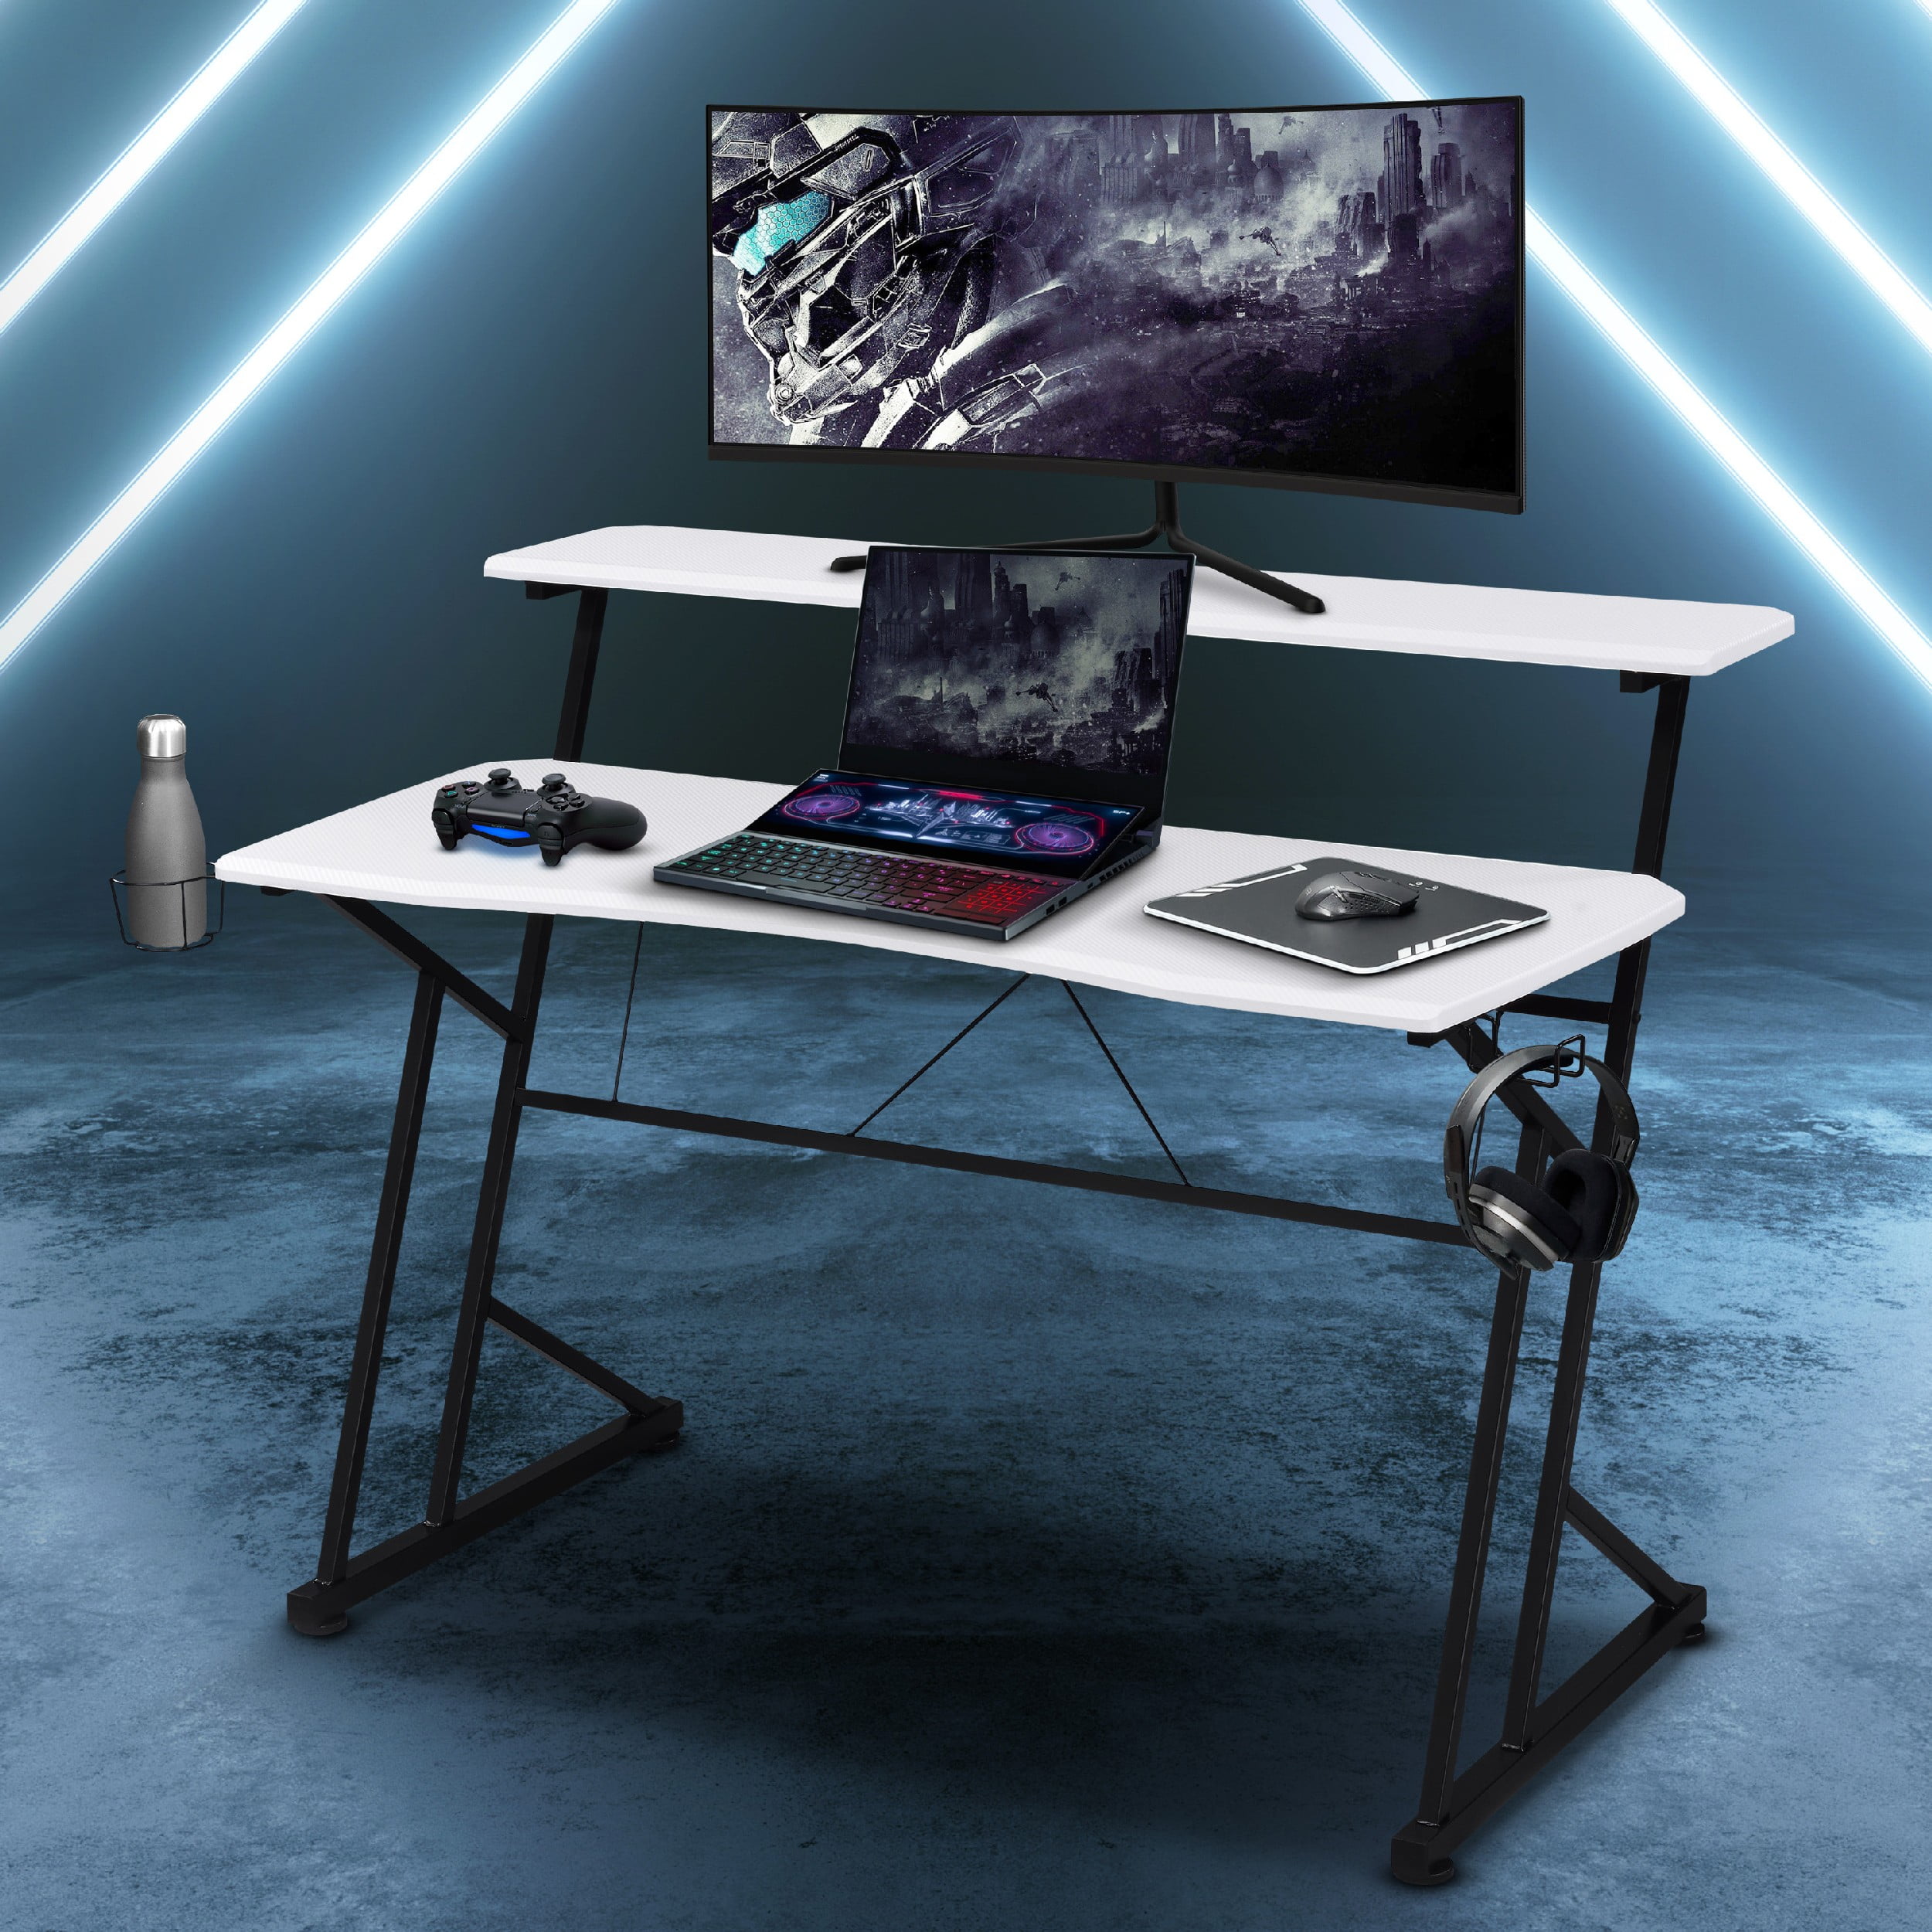 Techni Sport Gaming Desk - Two-Way Computer Desk with Elevated Monitor  Stands, CD Rack, Cup Holder, & Accessories Storage for a Complete Gaming  Setup